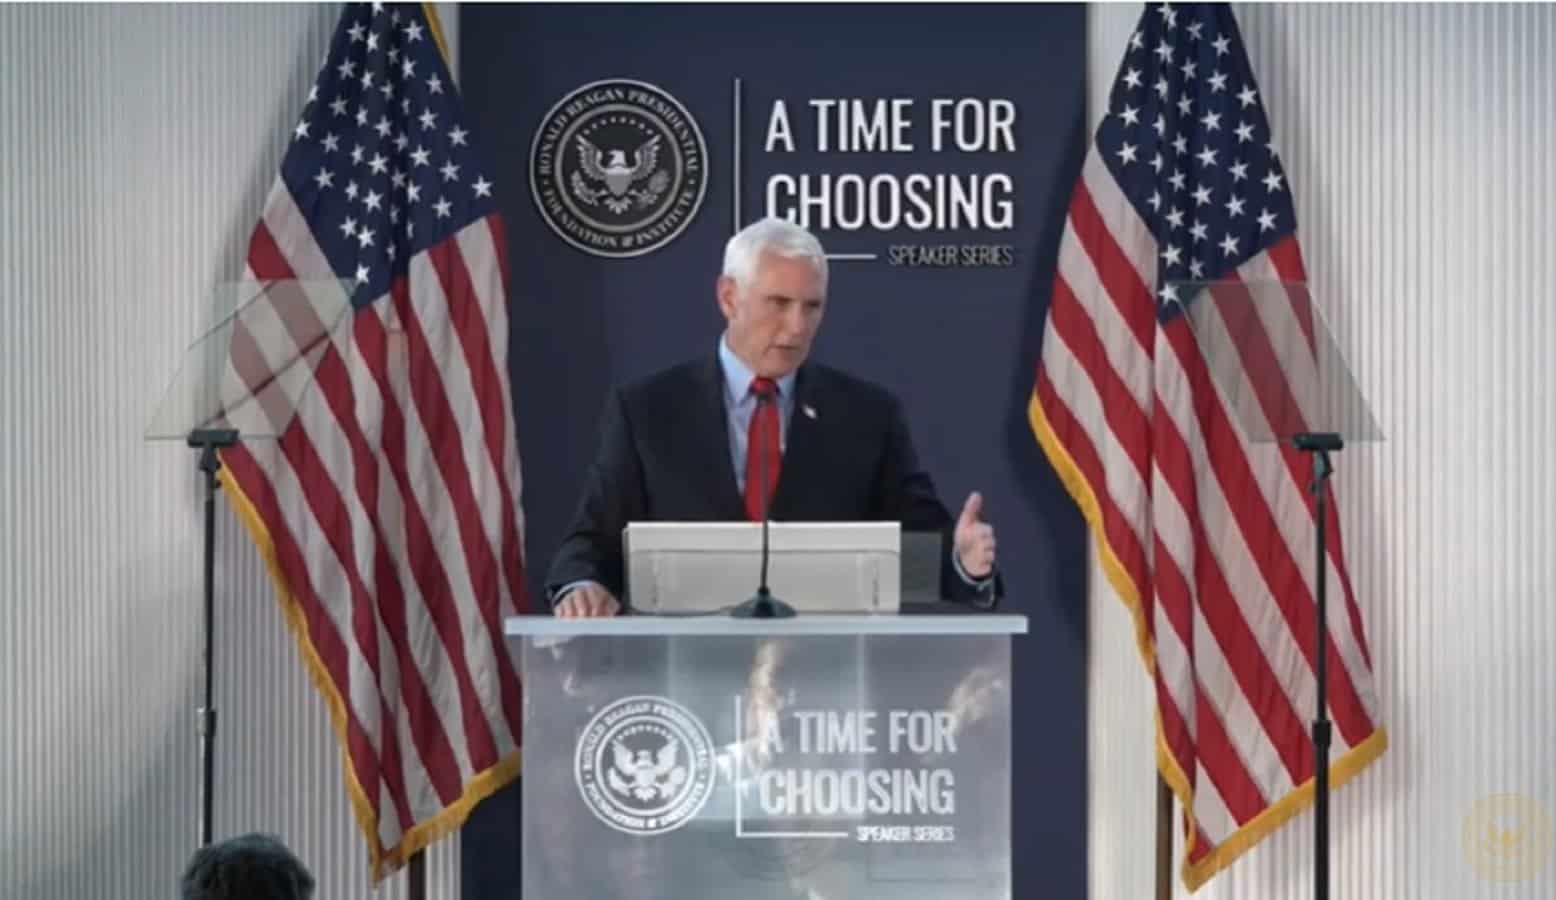 WATCH: Mike Pence Says He Was ‘Proud’ to Certify the
Election for Joe Biden 1